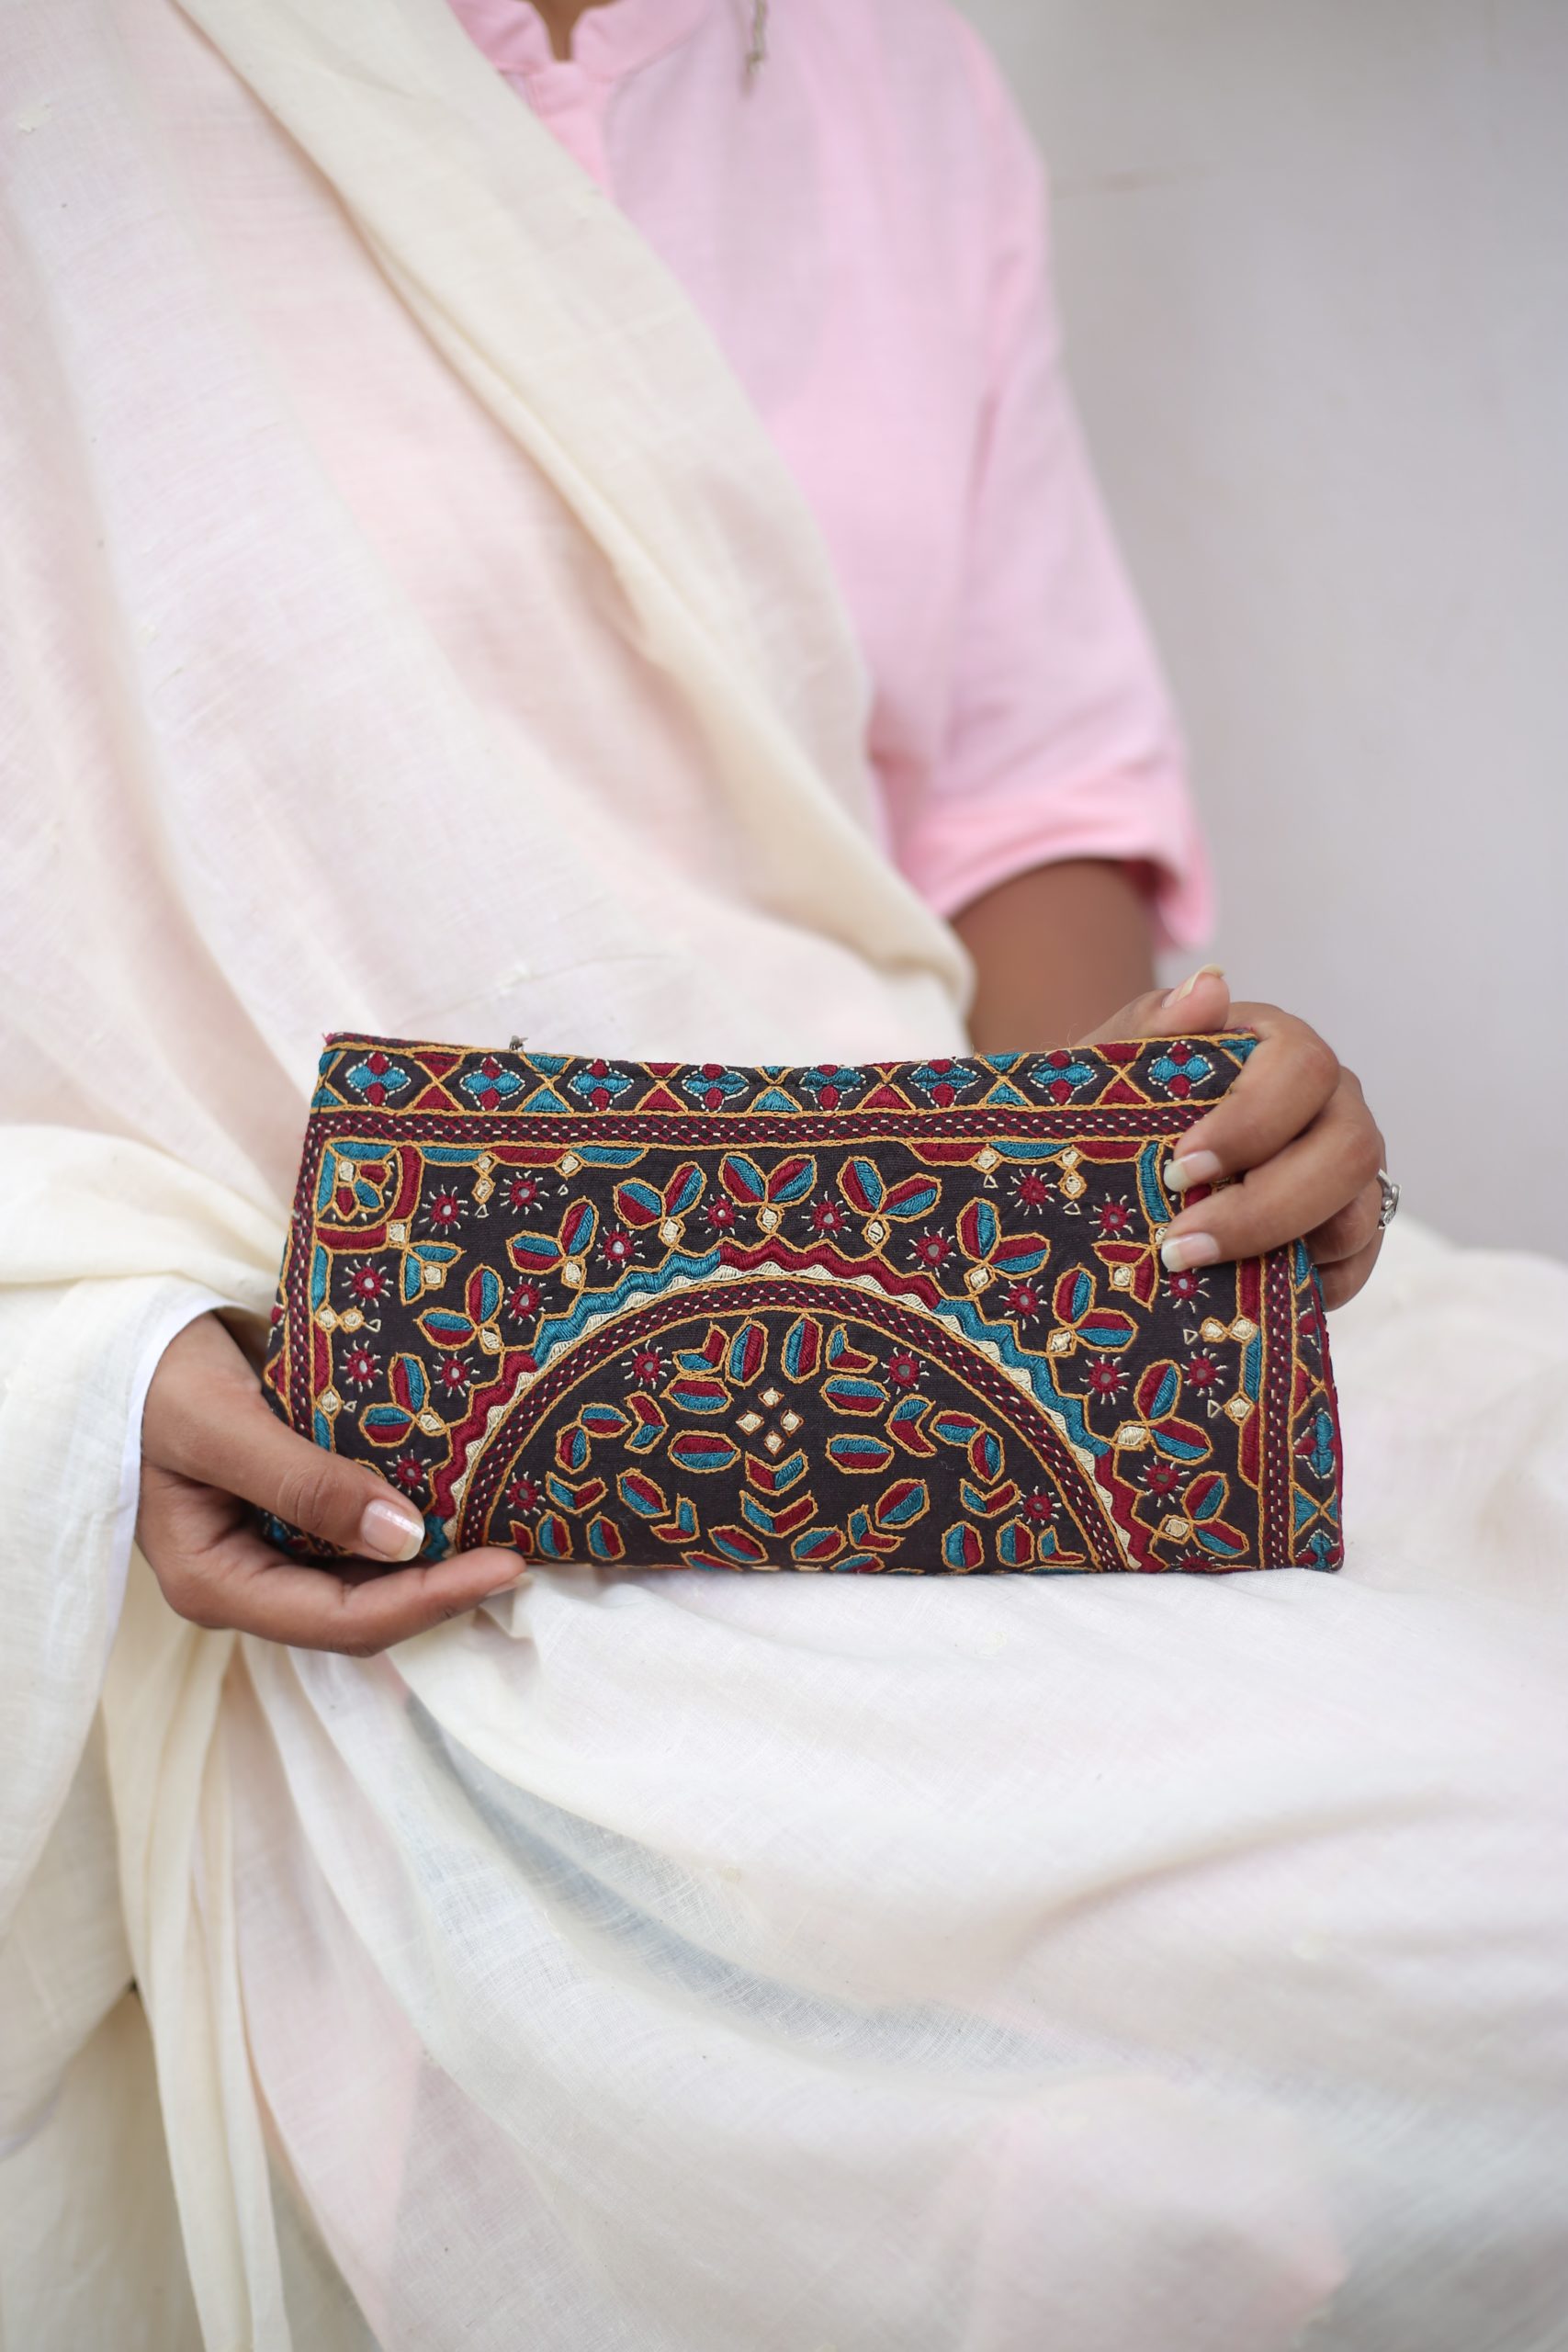 Lot of 2 T0 100 Pieces Clutch Bag, Women Wedding Gifted Bag, Party Wear Hand  Bag Indian Handmade Clutch Purse for Women, Unique Surprise Bag - Etsy